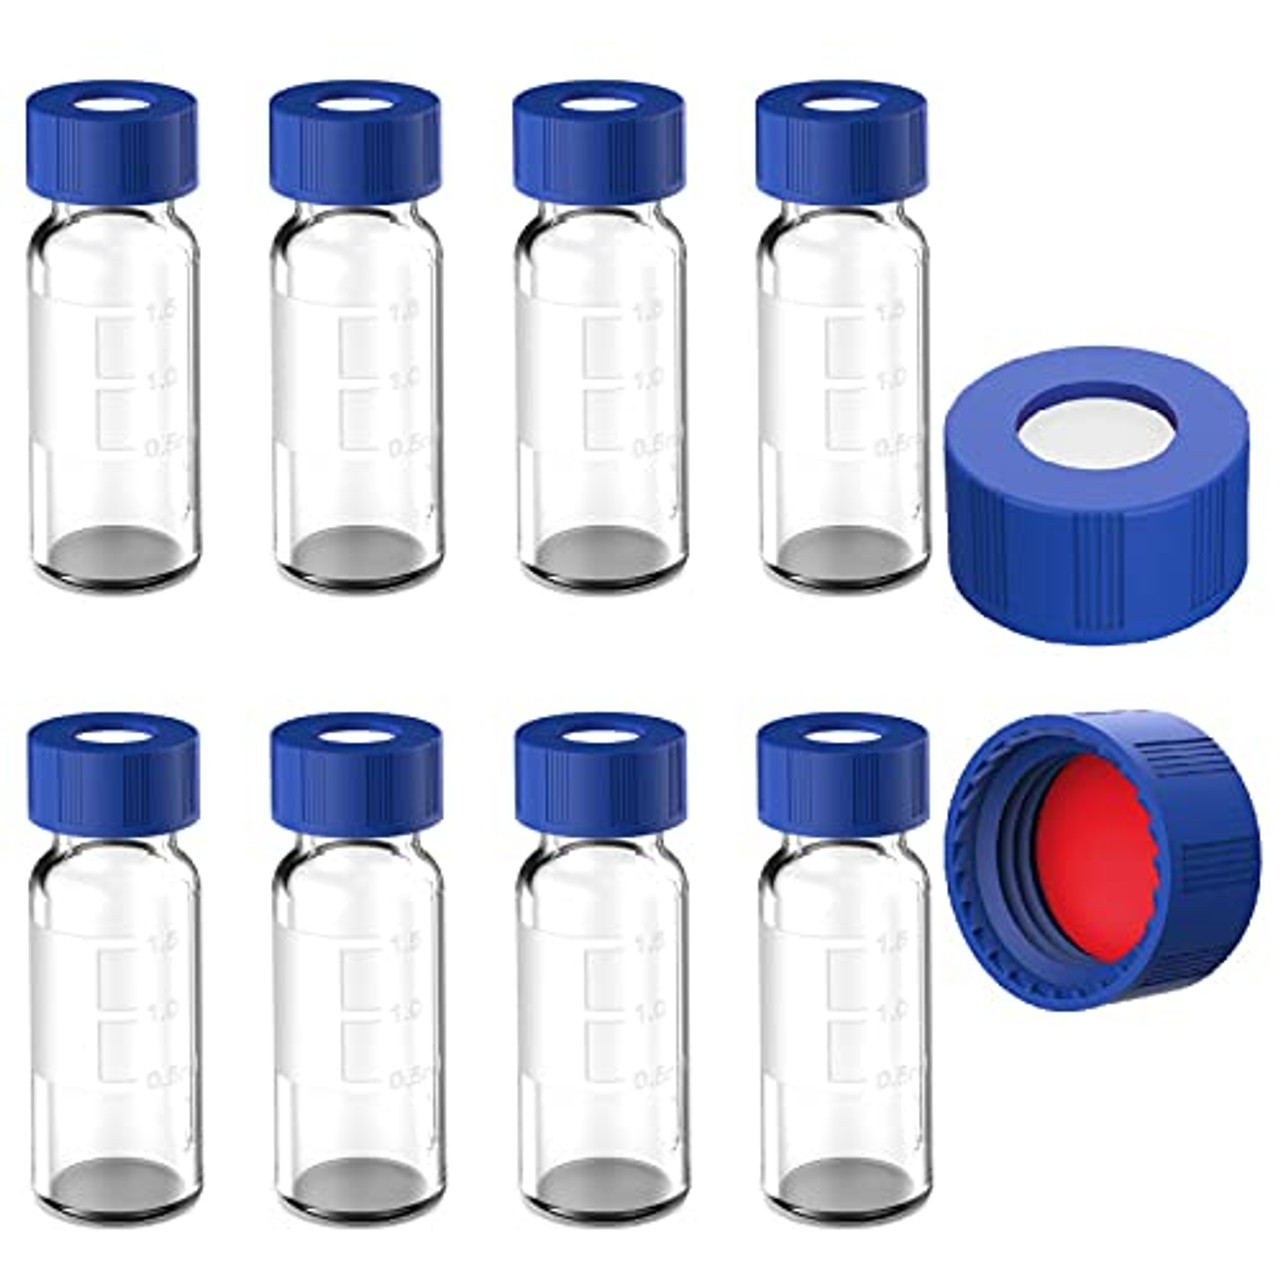 7ML Polypropylene Concentrate Jars - Clear (1,000 Qty)